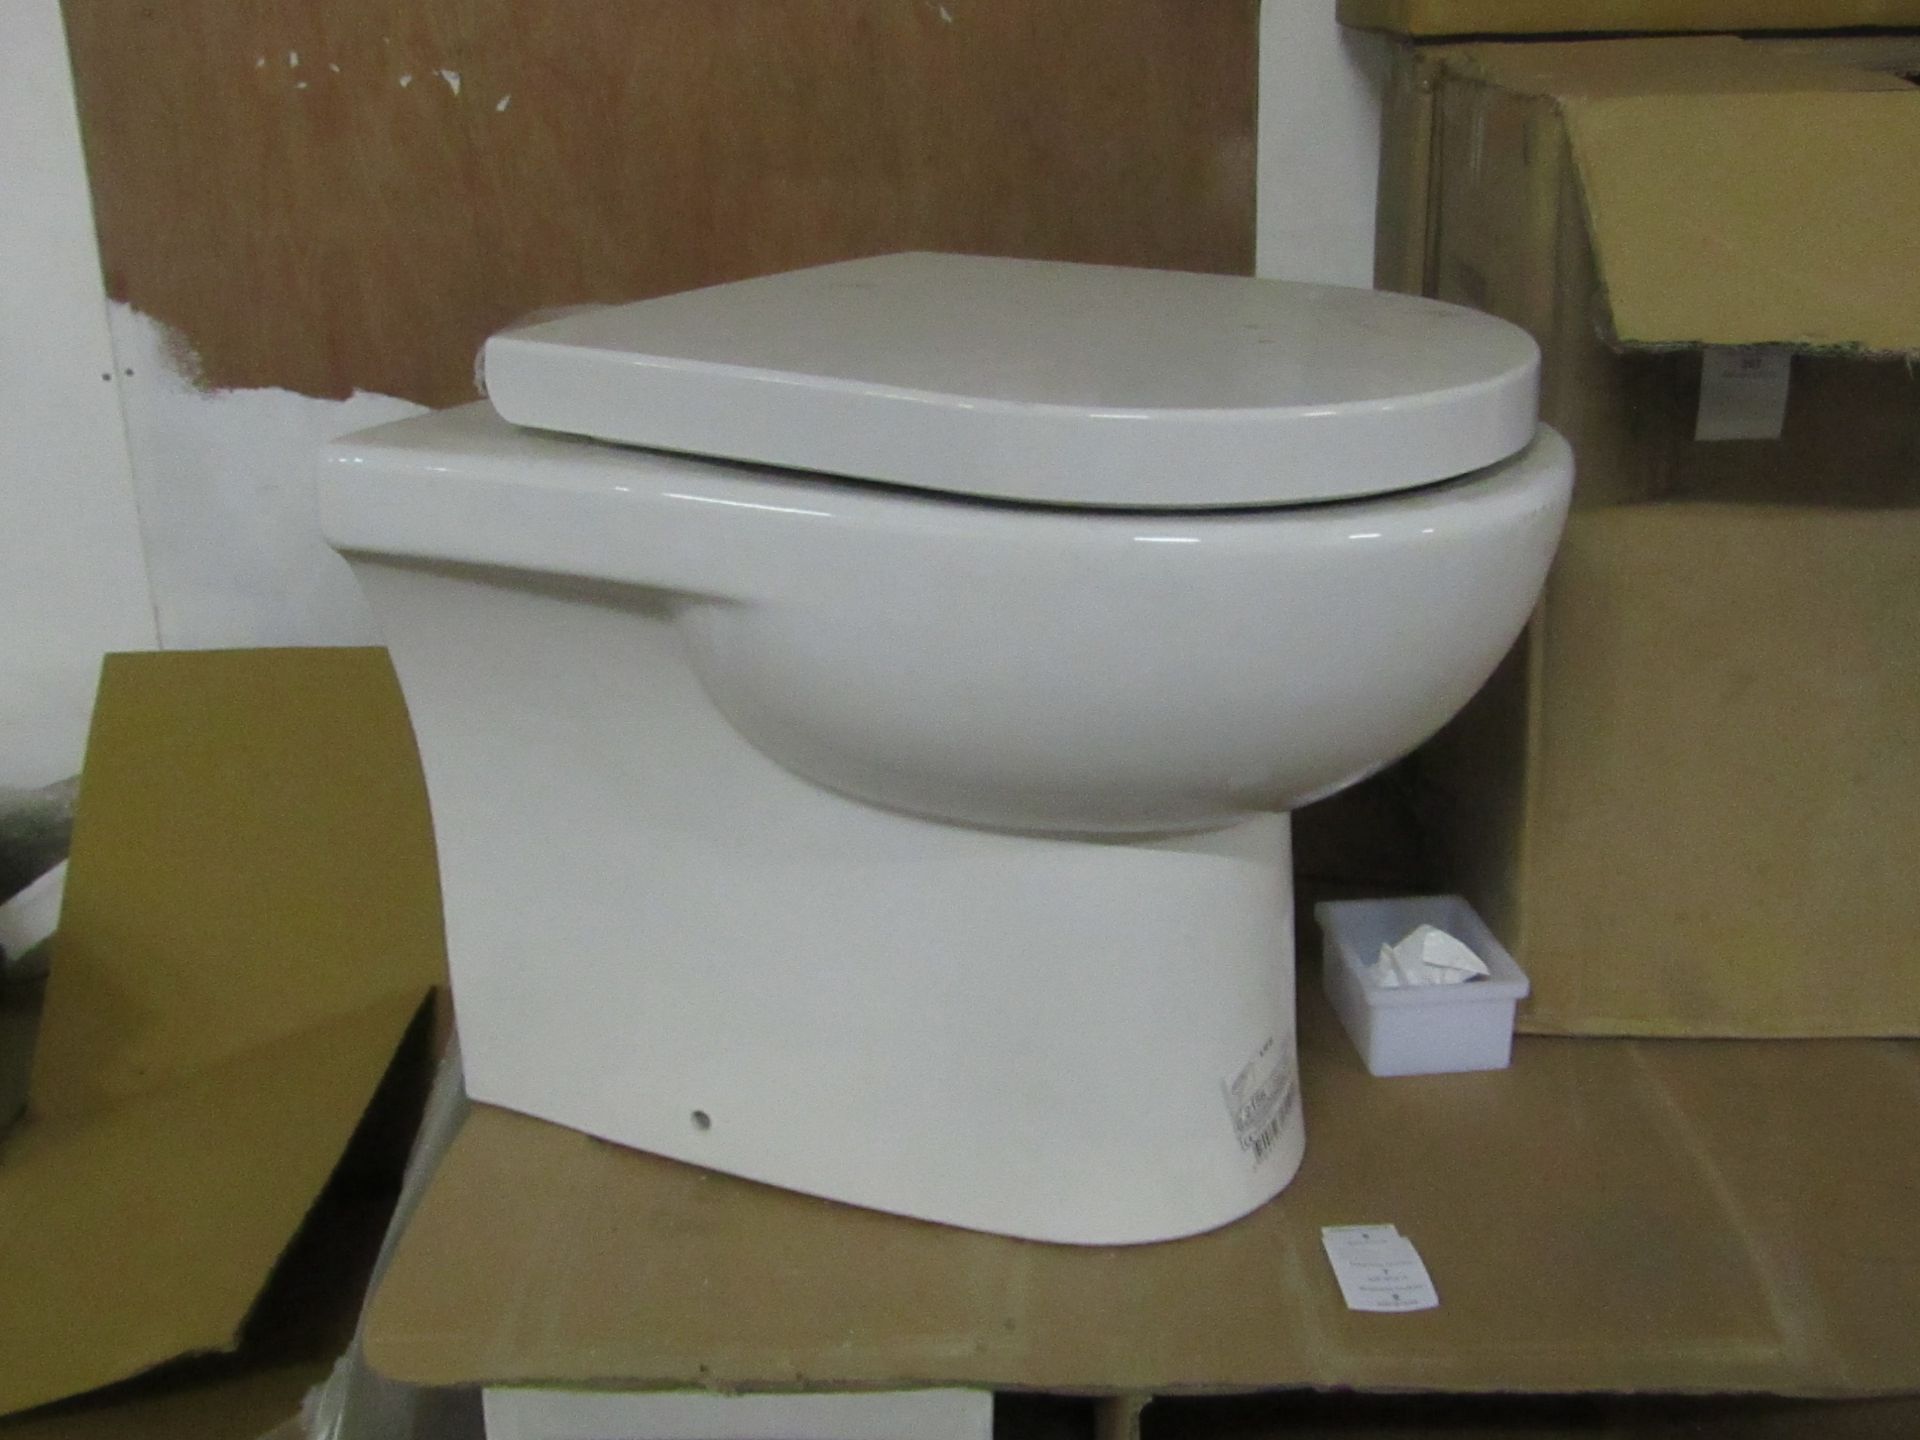 Laufen Life back to wall toilet pan, comes with matching toilet seat. Both new.